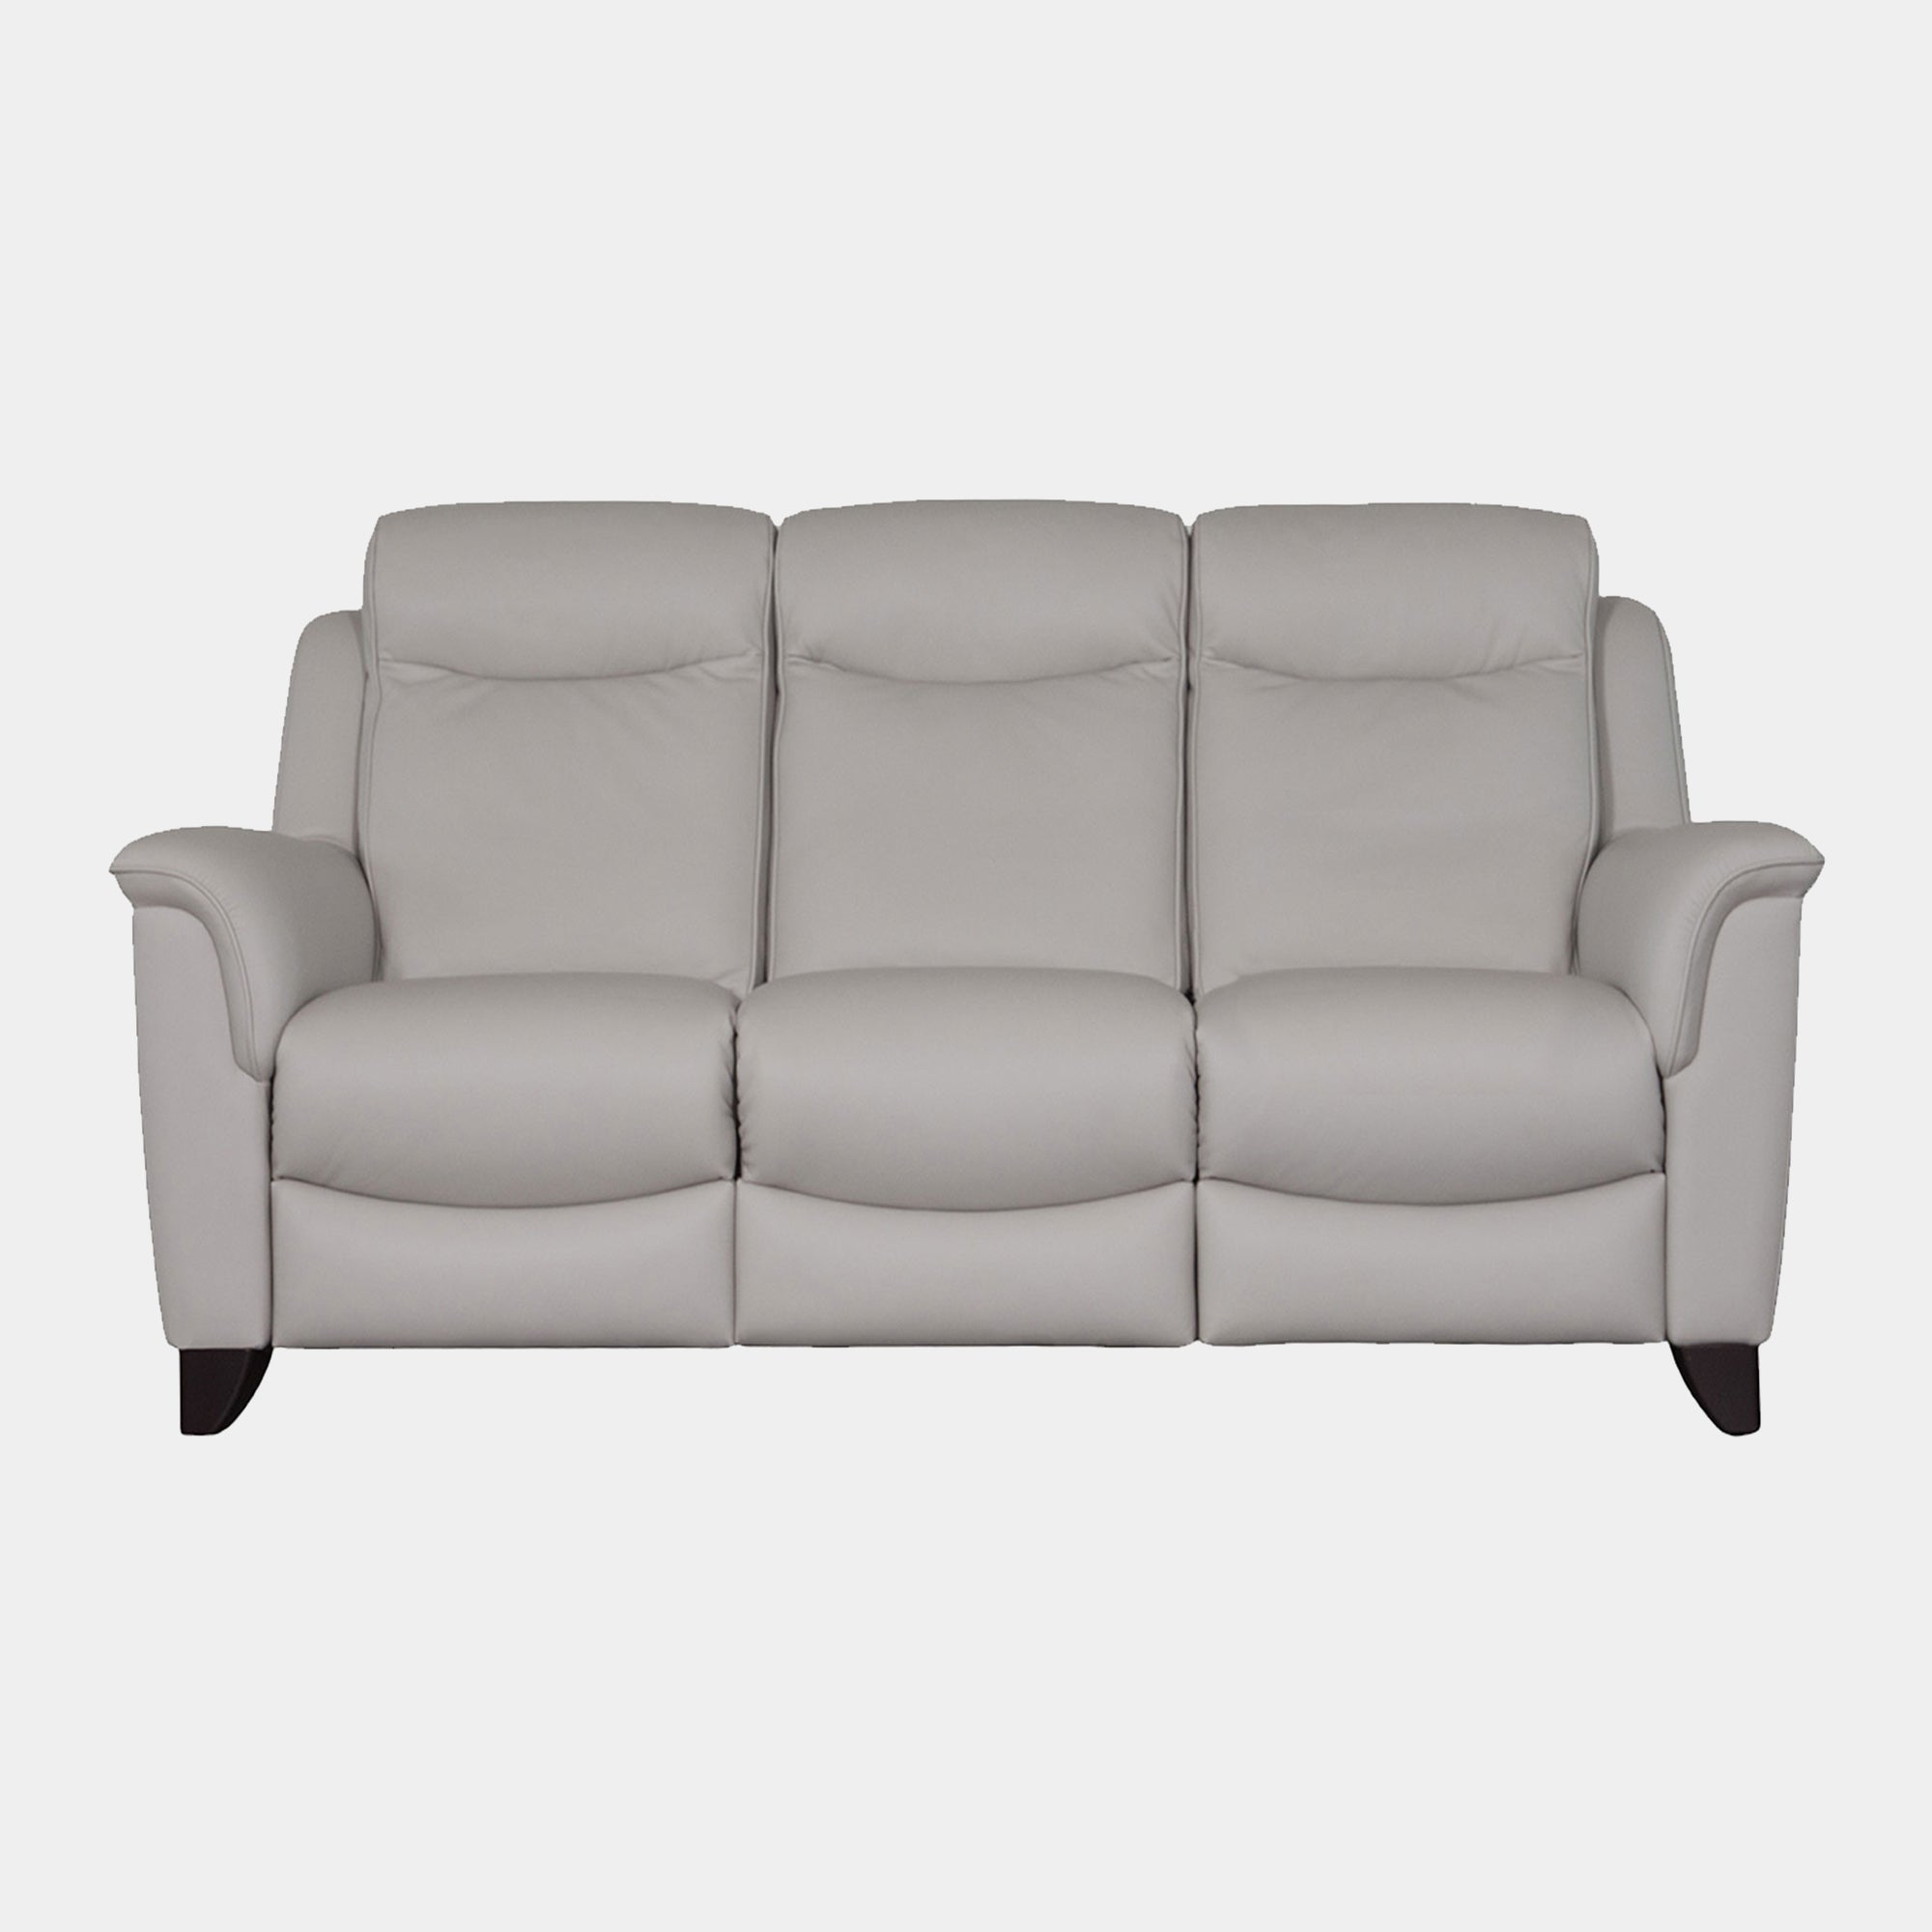 Parker Knoll Manhattan - 3 Seat Sofa In Leather